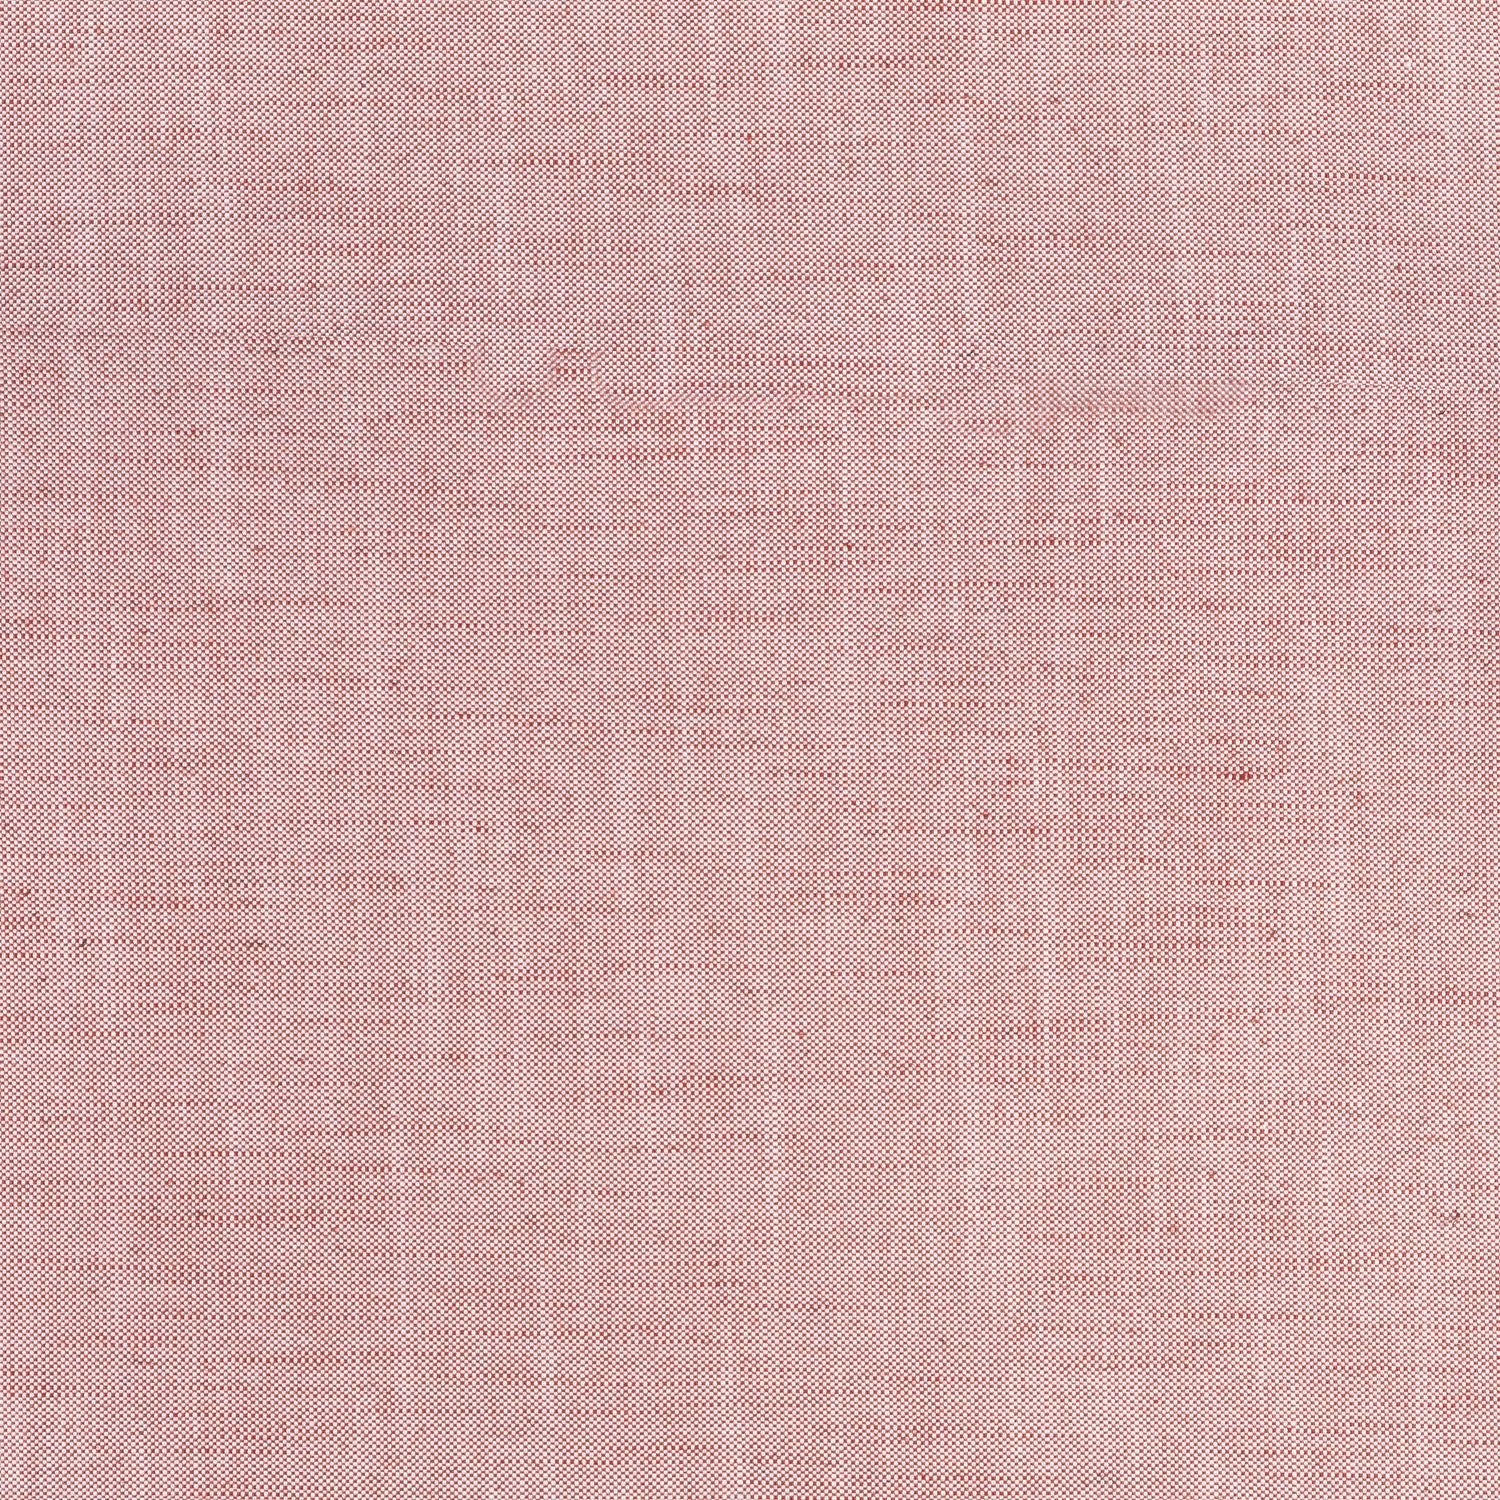 Ambient fabric in cranberry color - pattern number W75211 - by Thibaut in the Elements collection